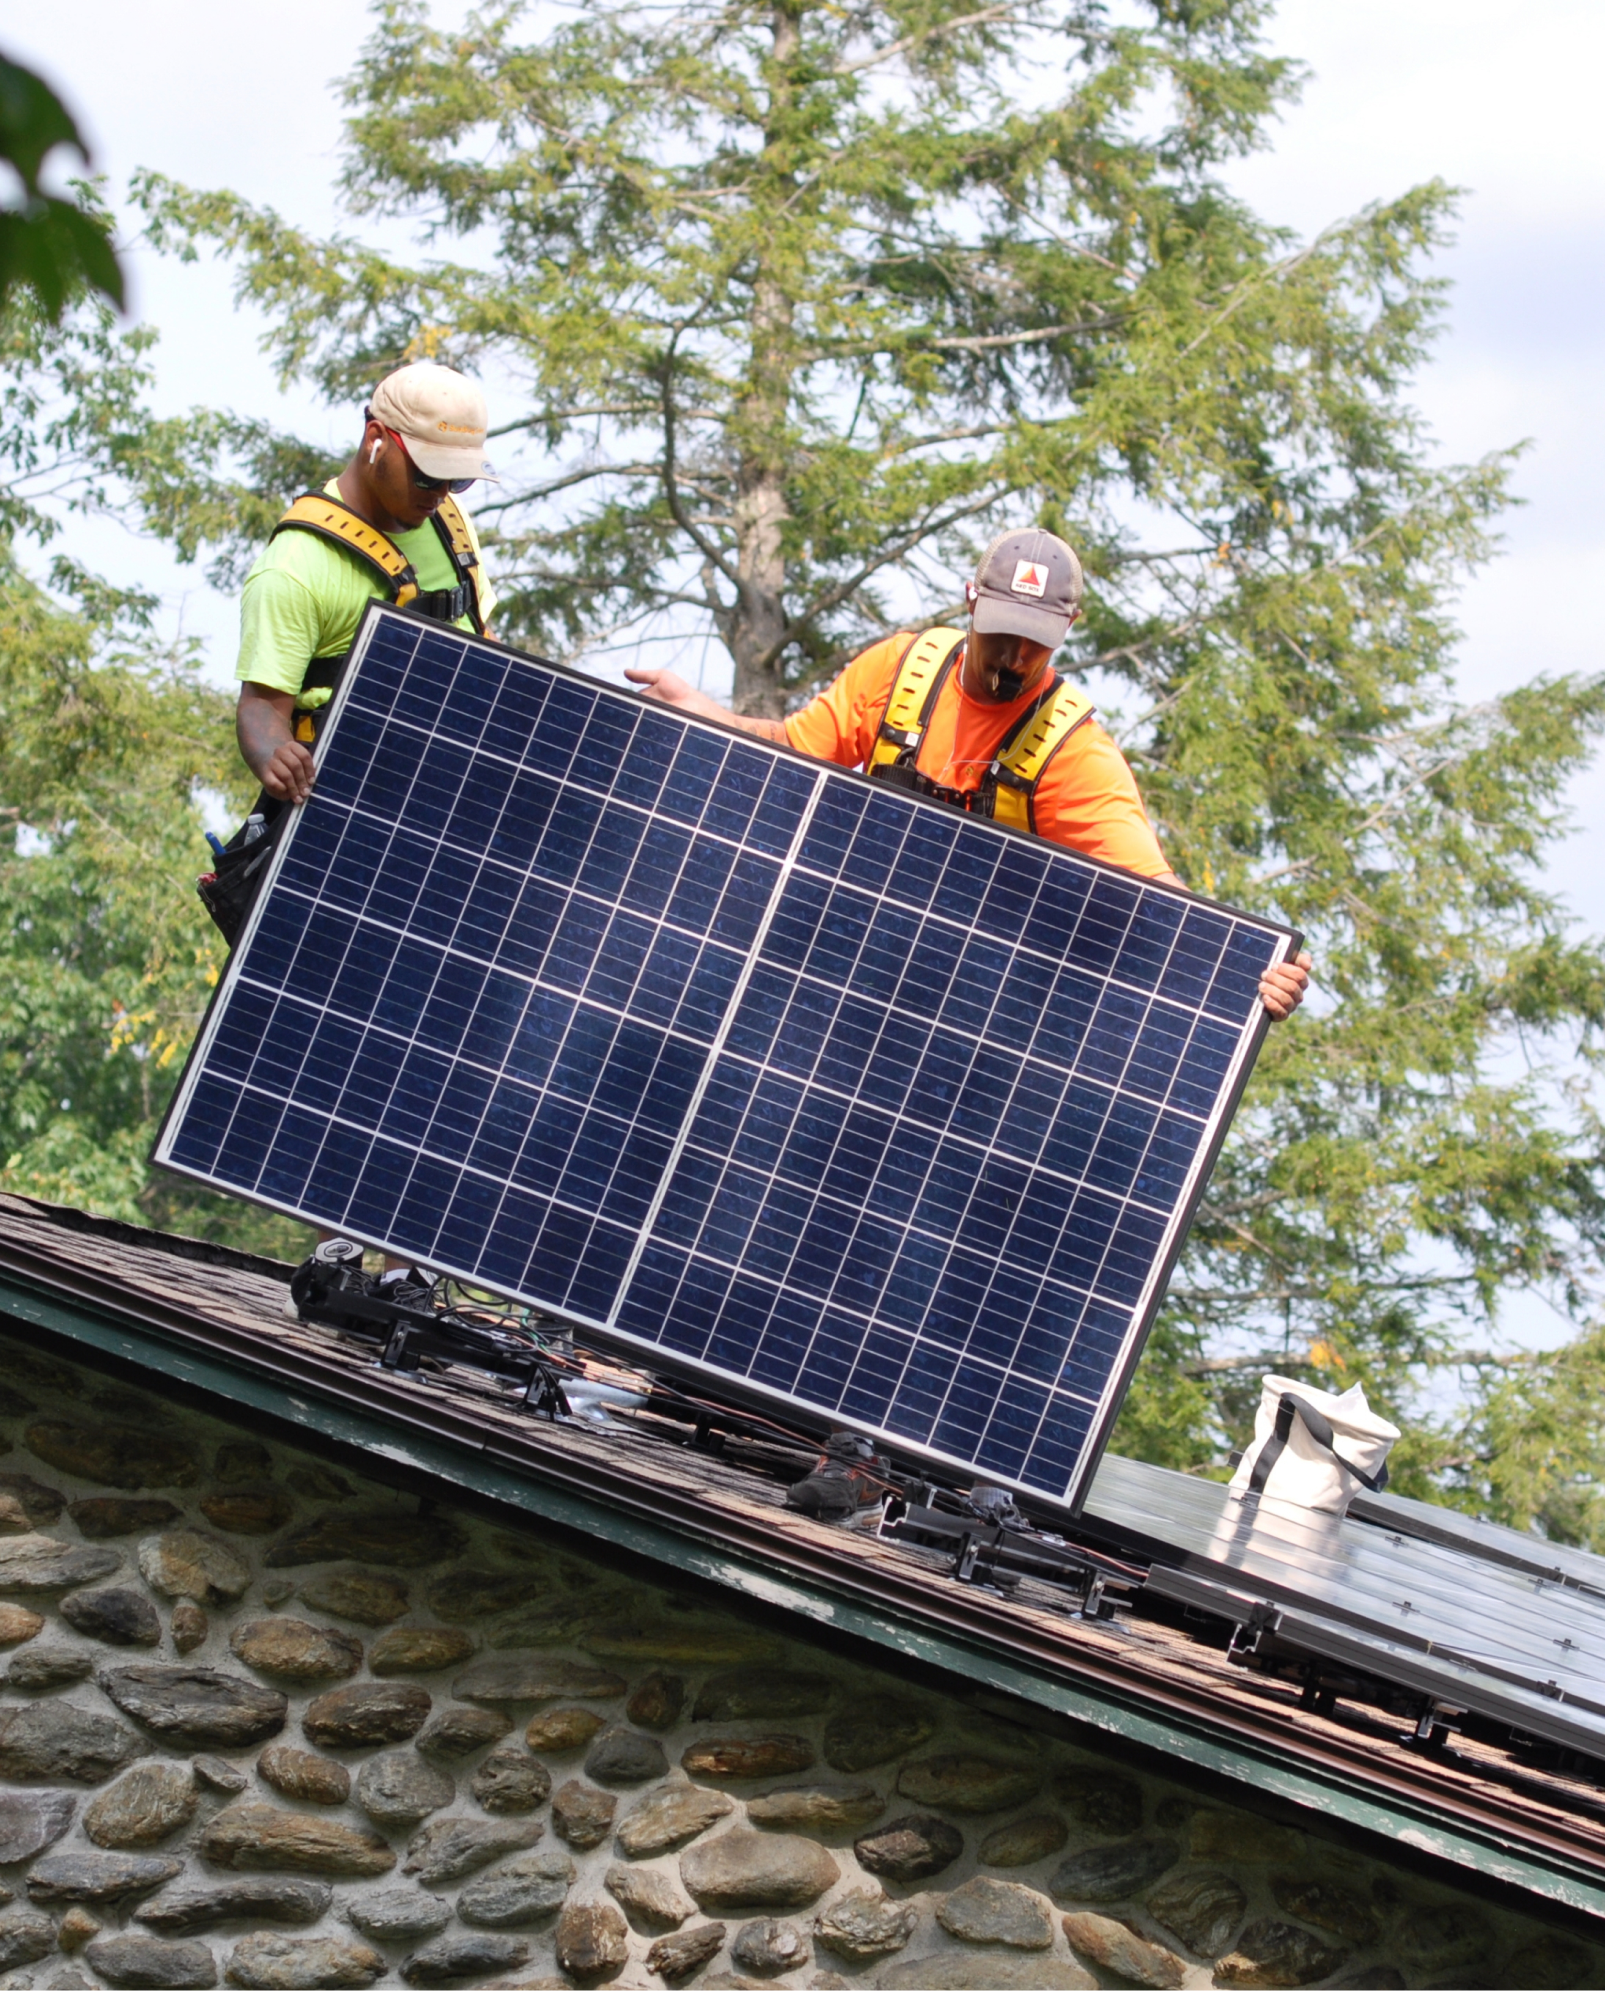 two men working on roof carrying solar panel